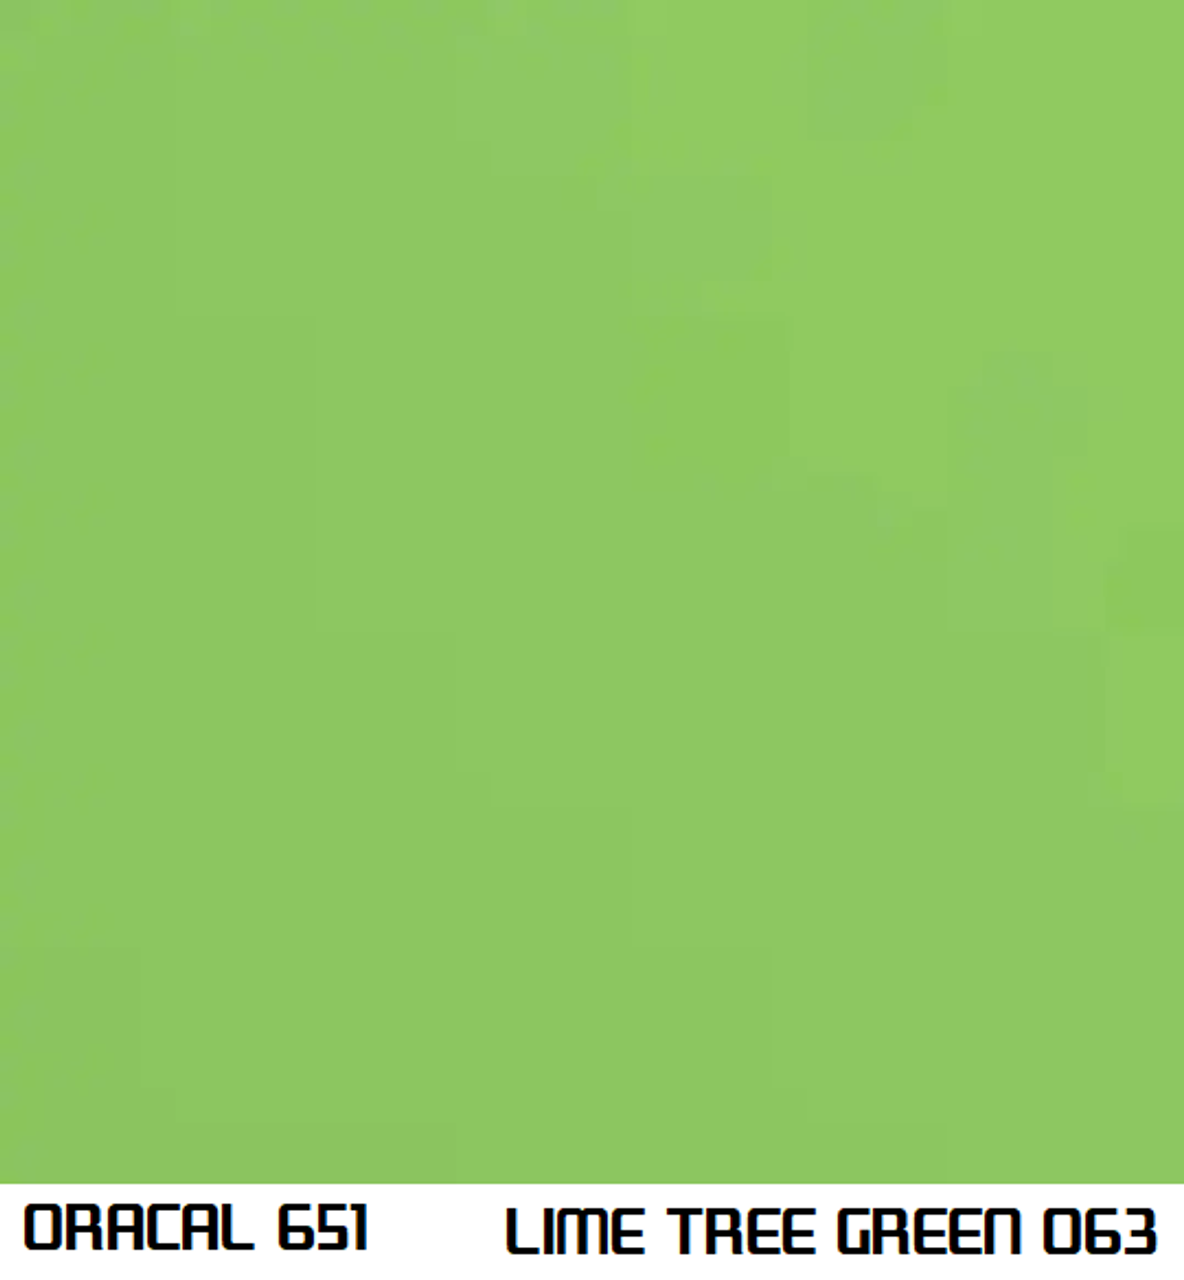 15 wide Oracal 651 Lime Tree Green 063 vinyl by-the-foot - Vinyl